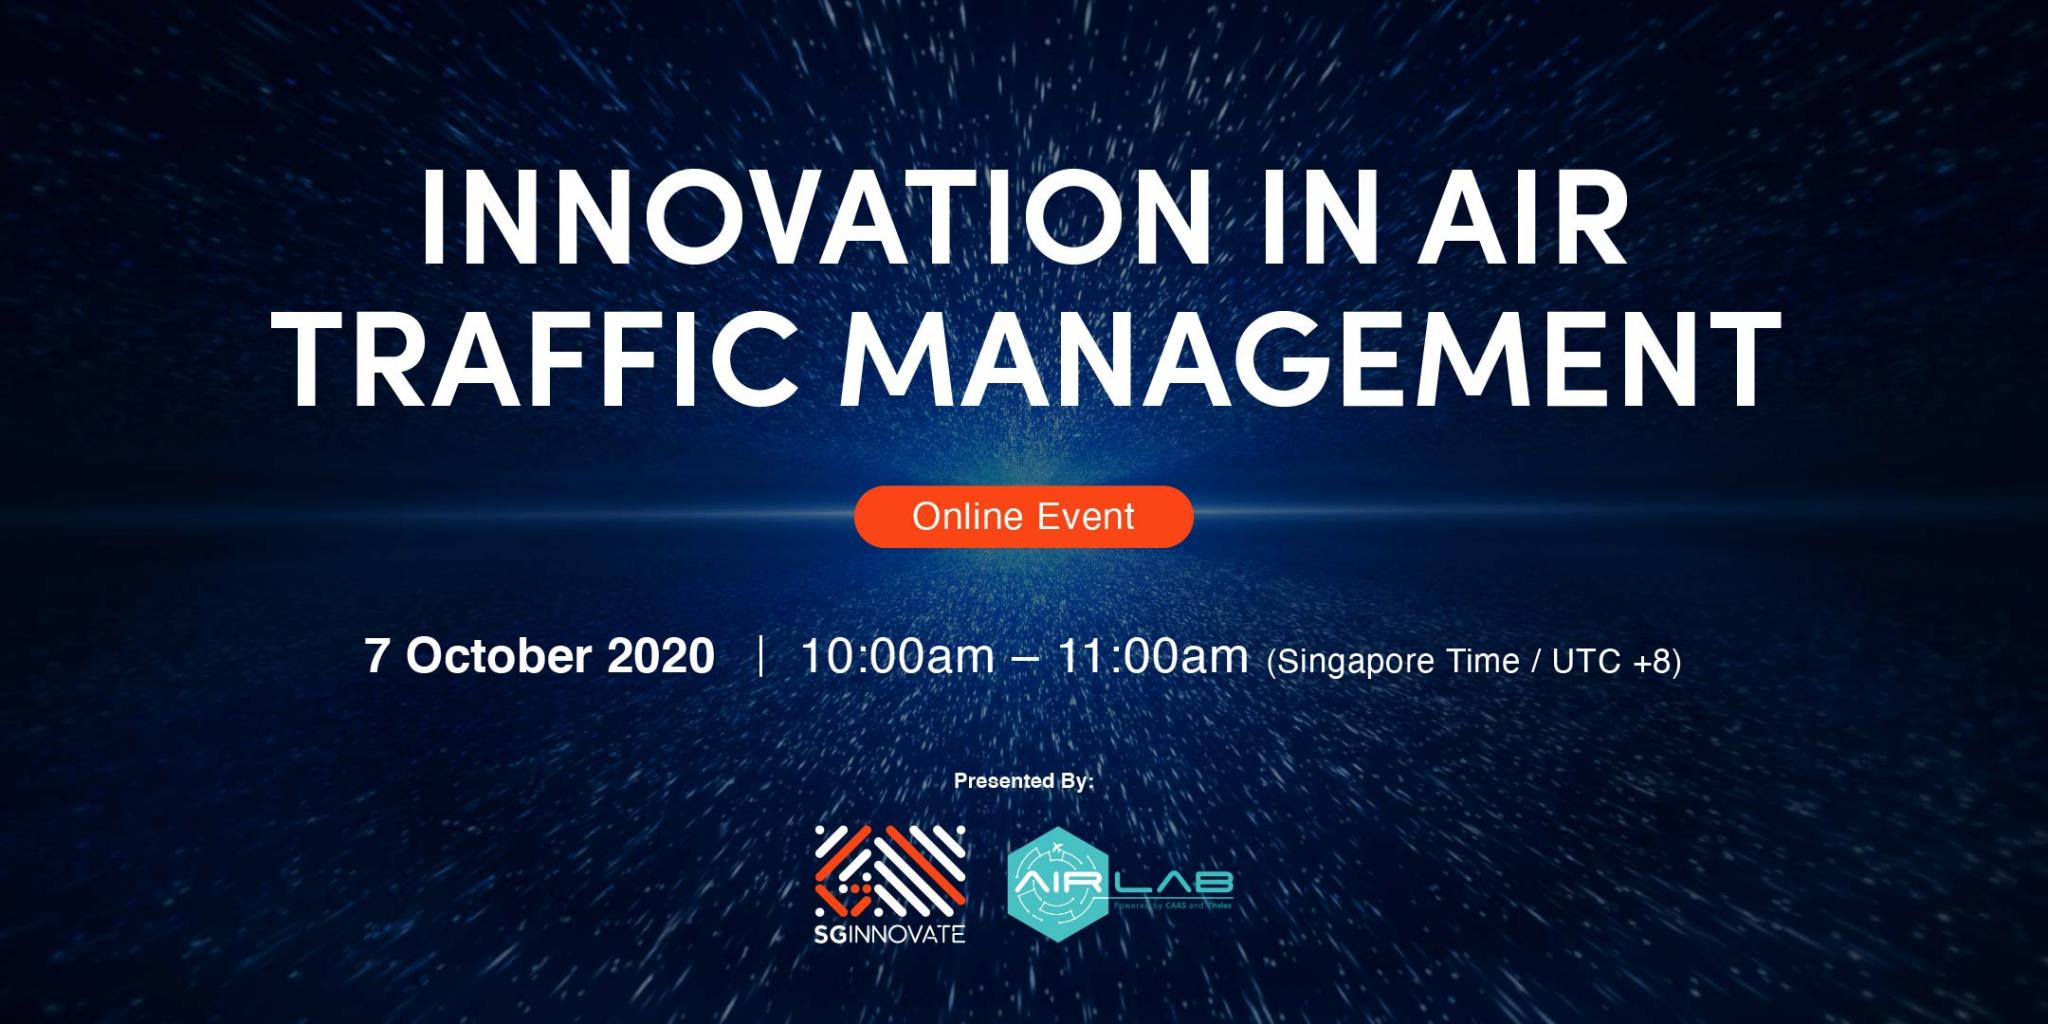 Innovation in Air Traffic Management